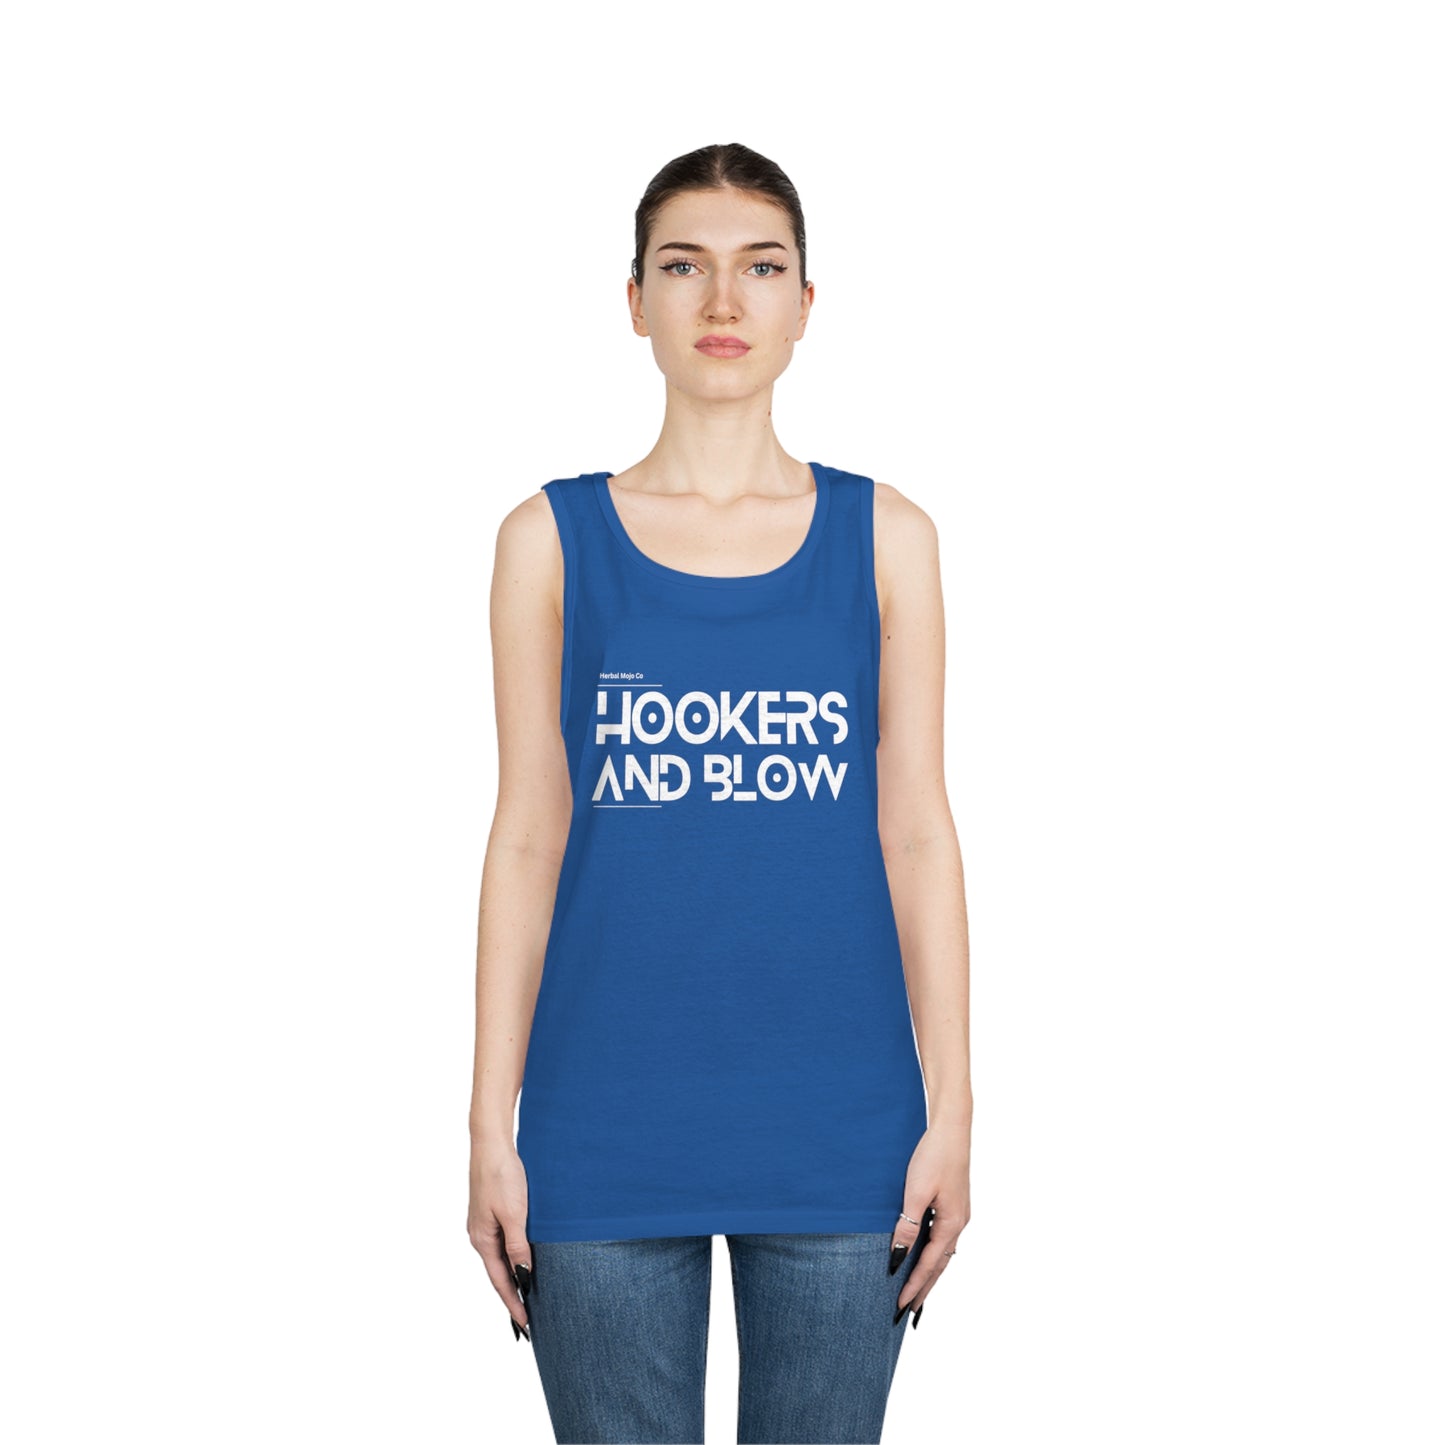 Royal Blue Stamina for Men Hookers & Blow unisex cotton tank top product shot shown in context worn my female with white background